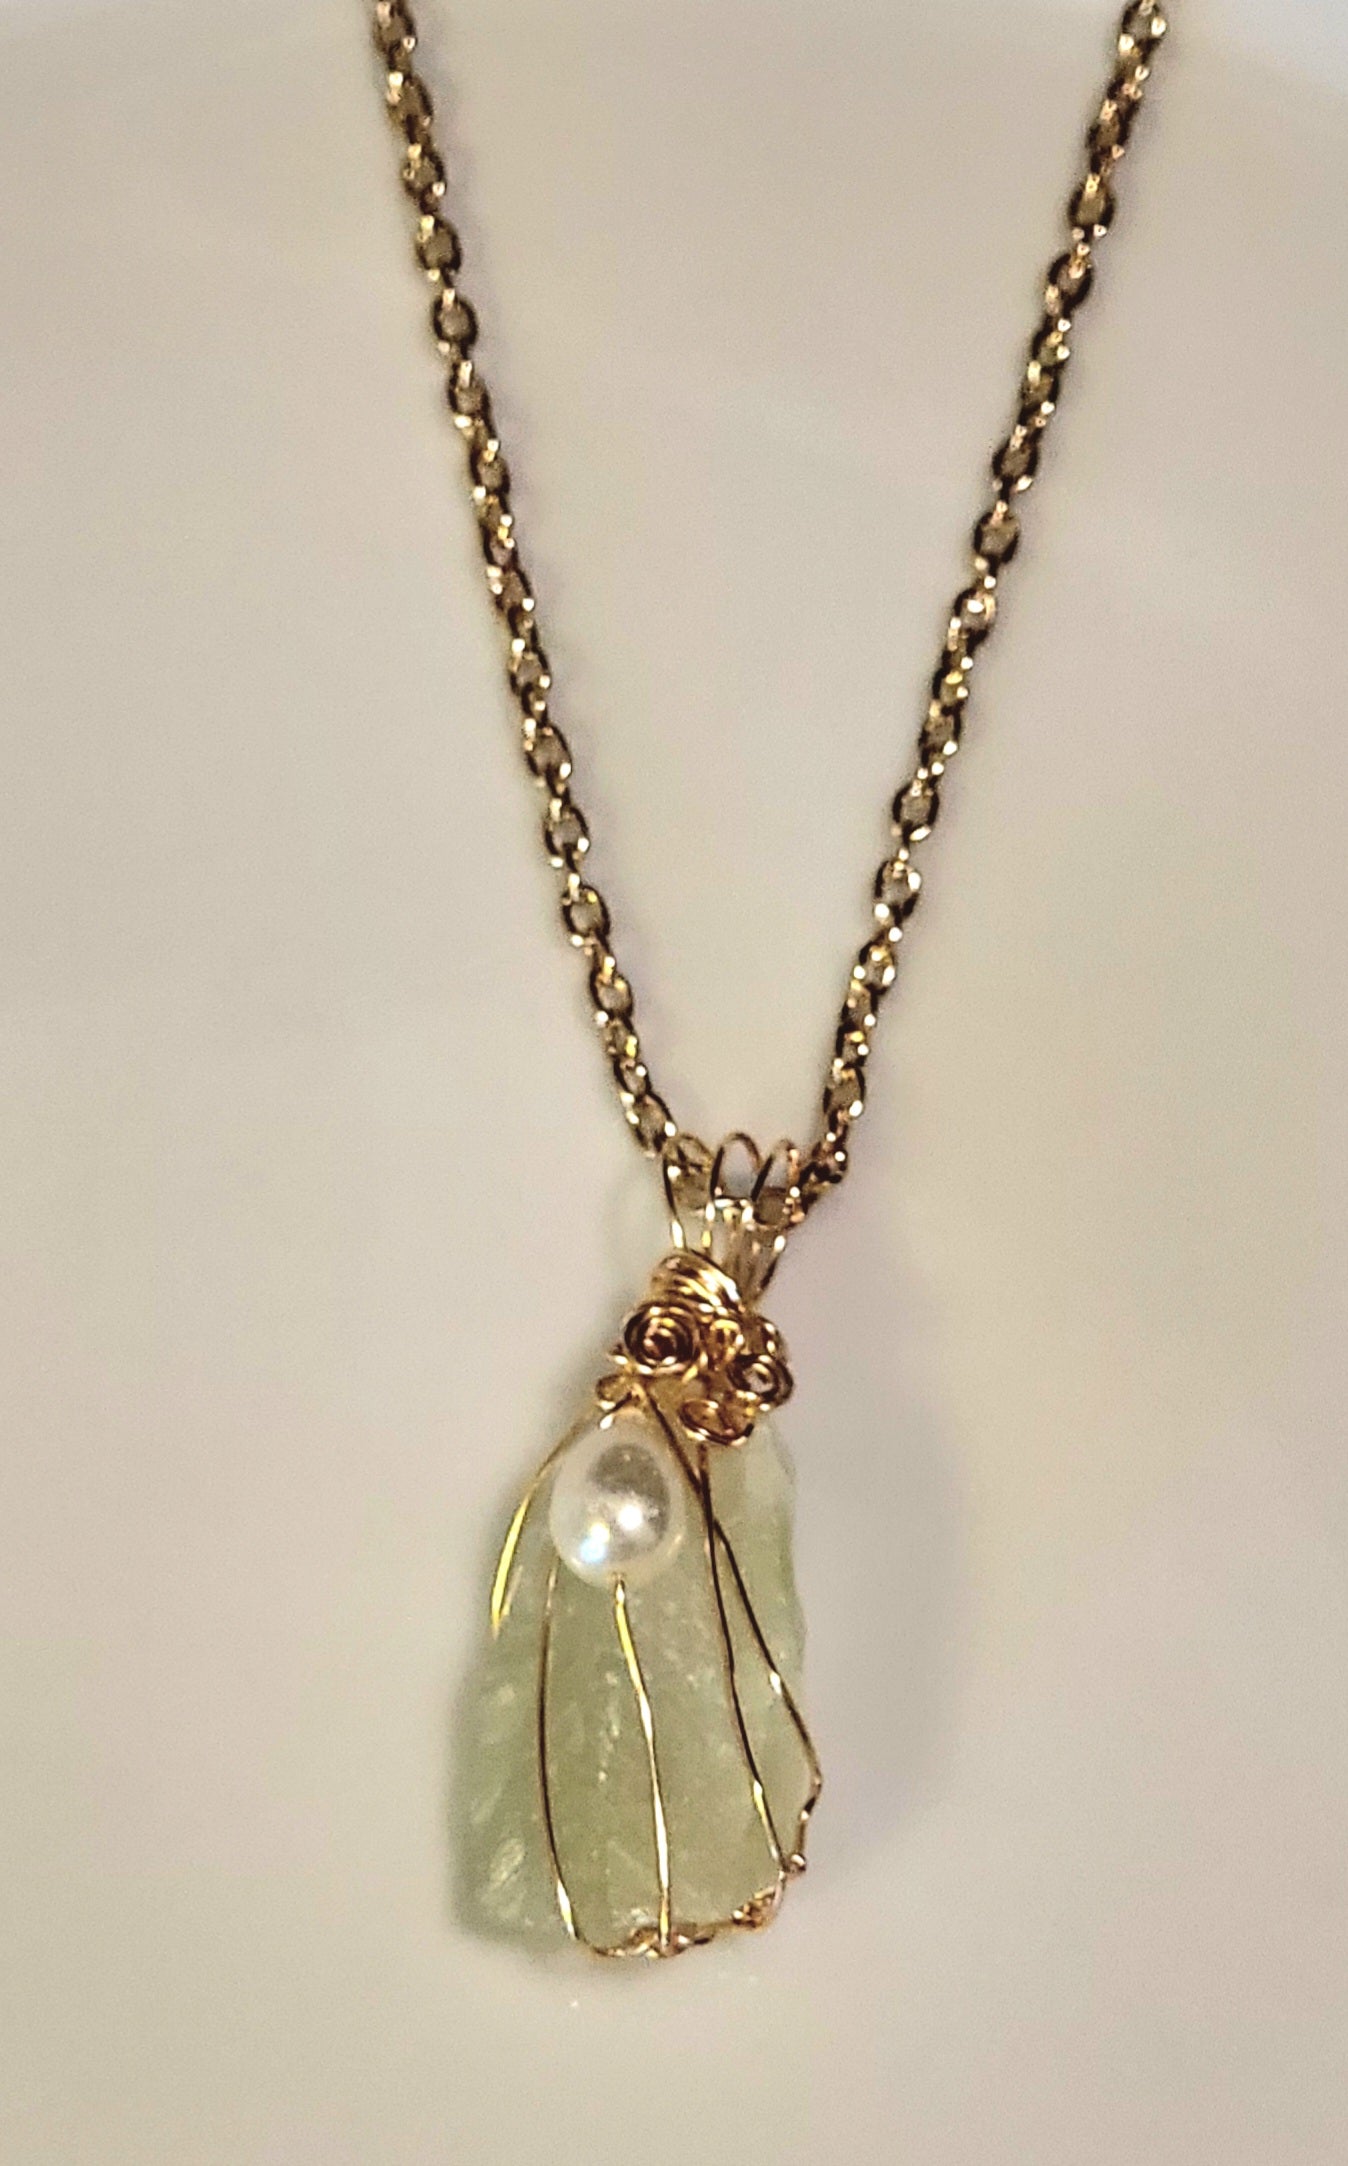 Gemstone Necklace green calcite gold   SOLD